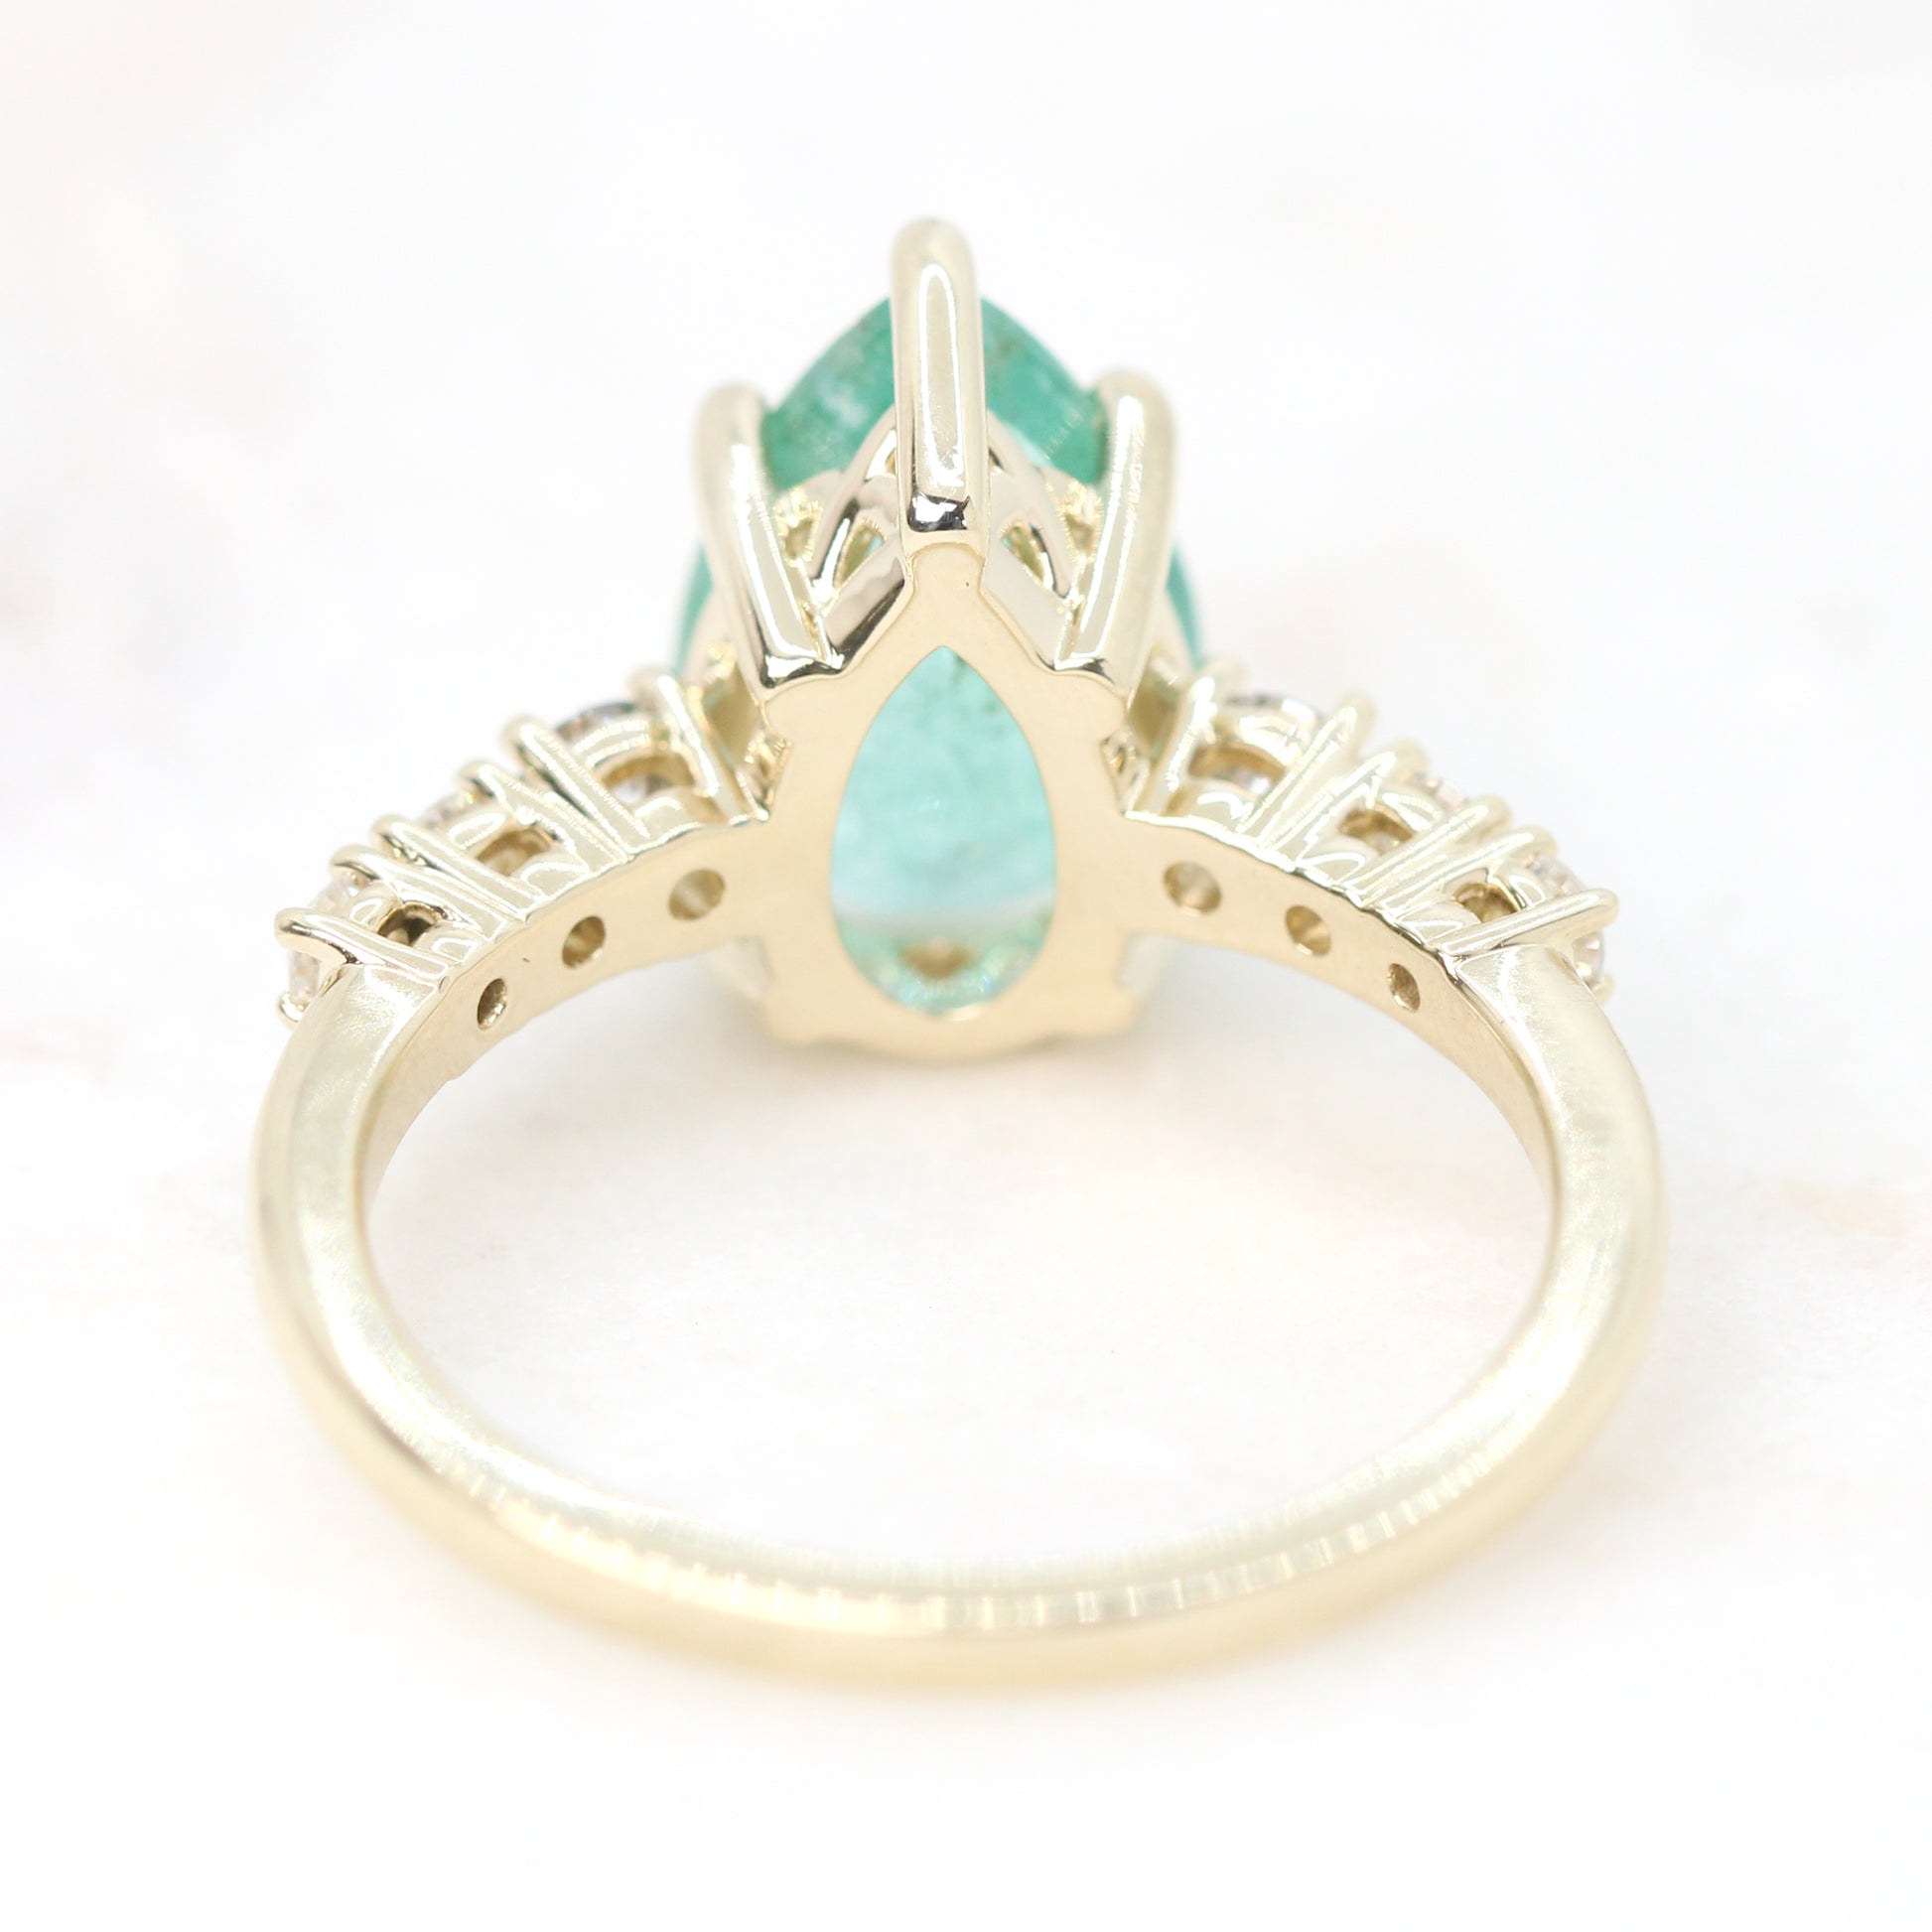 Tina Ring with a 2.50 Carat Pear Emerald and Gray & White Accent Diamonds in 14k Yellow Gold - Ready to Size and Ship - Midwinter Co. Alternative Bridal Rings and Modern Fine Jewelry